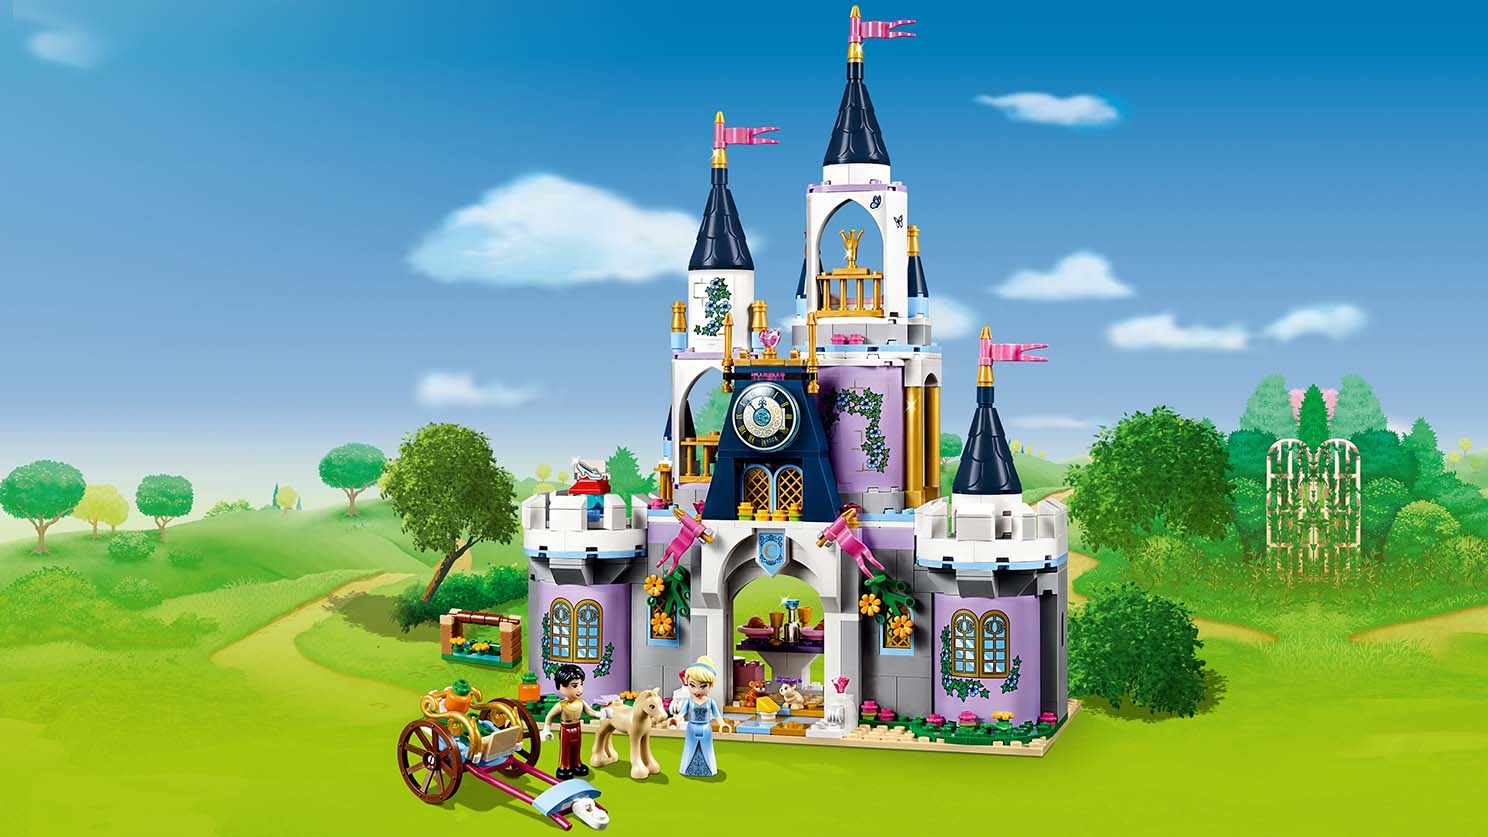 LEGO Disney - 41154 Cindarella's Dream Castle - Cinderella and Prince Charming enjoys life at the castle with the friendly mice and Cinderella's foal.